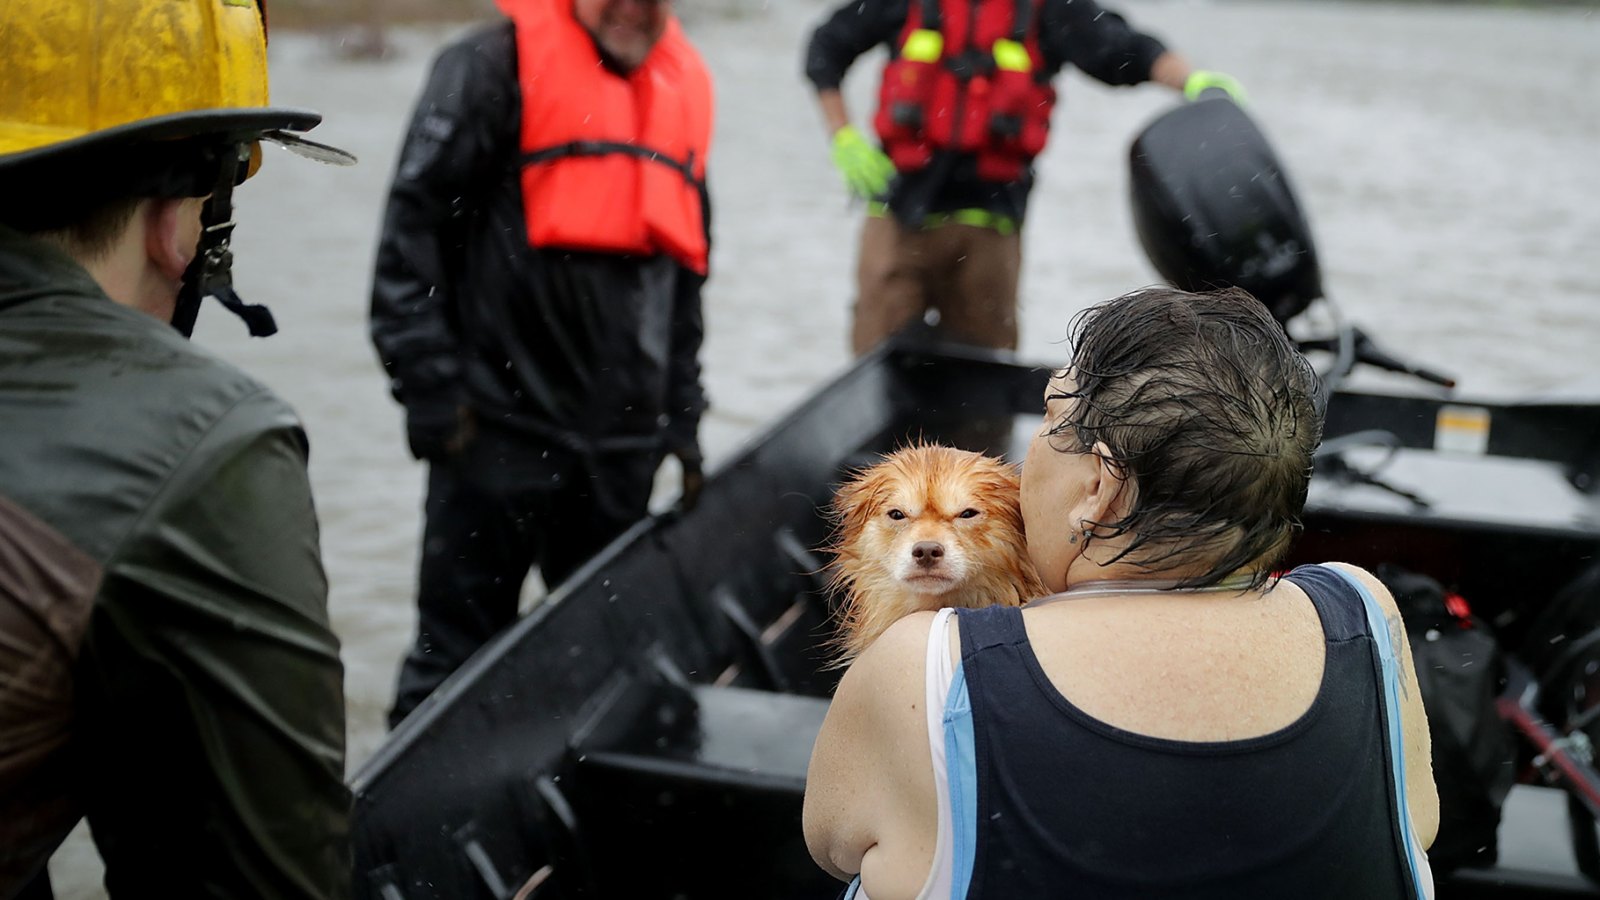 Rescue workers from Township No. 7 Fire Department and volunteers from the Civilian Crisis Response Team use a boat to rescue a woman and her dog from their flooded home during Hurricane Florence